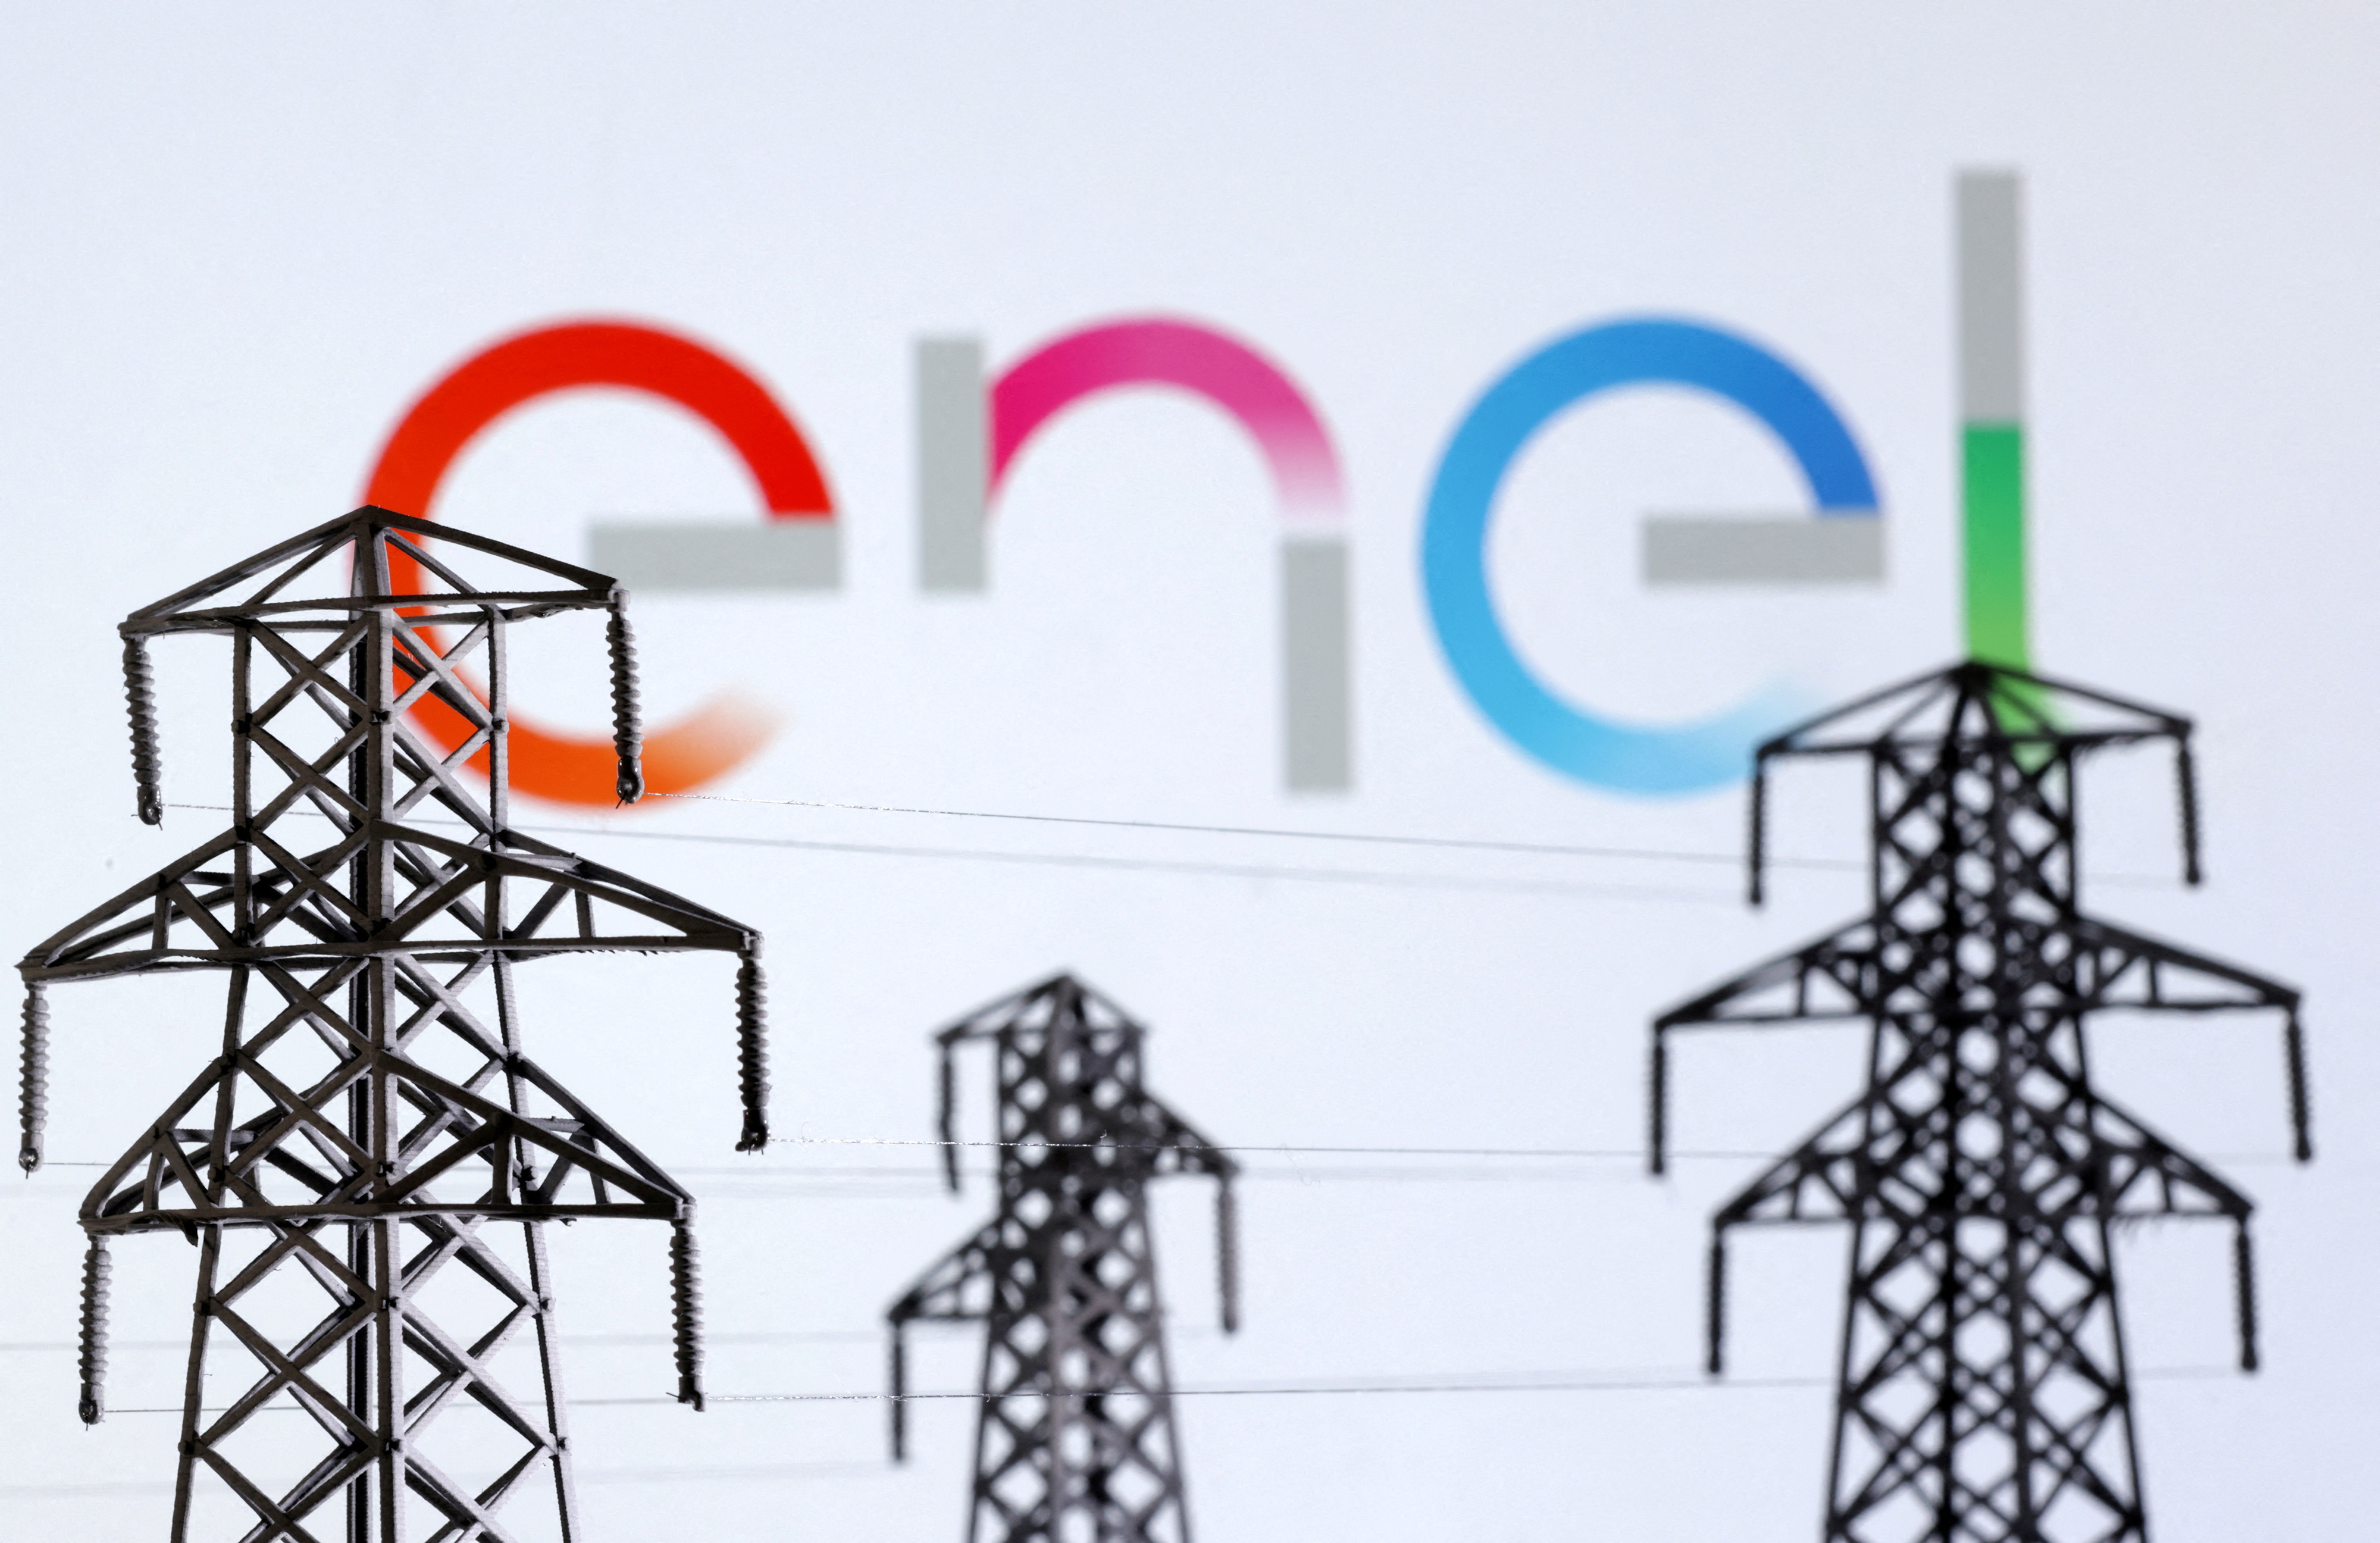 Brazil's power co Equatorial shares jump after deal for Enel's